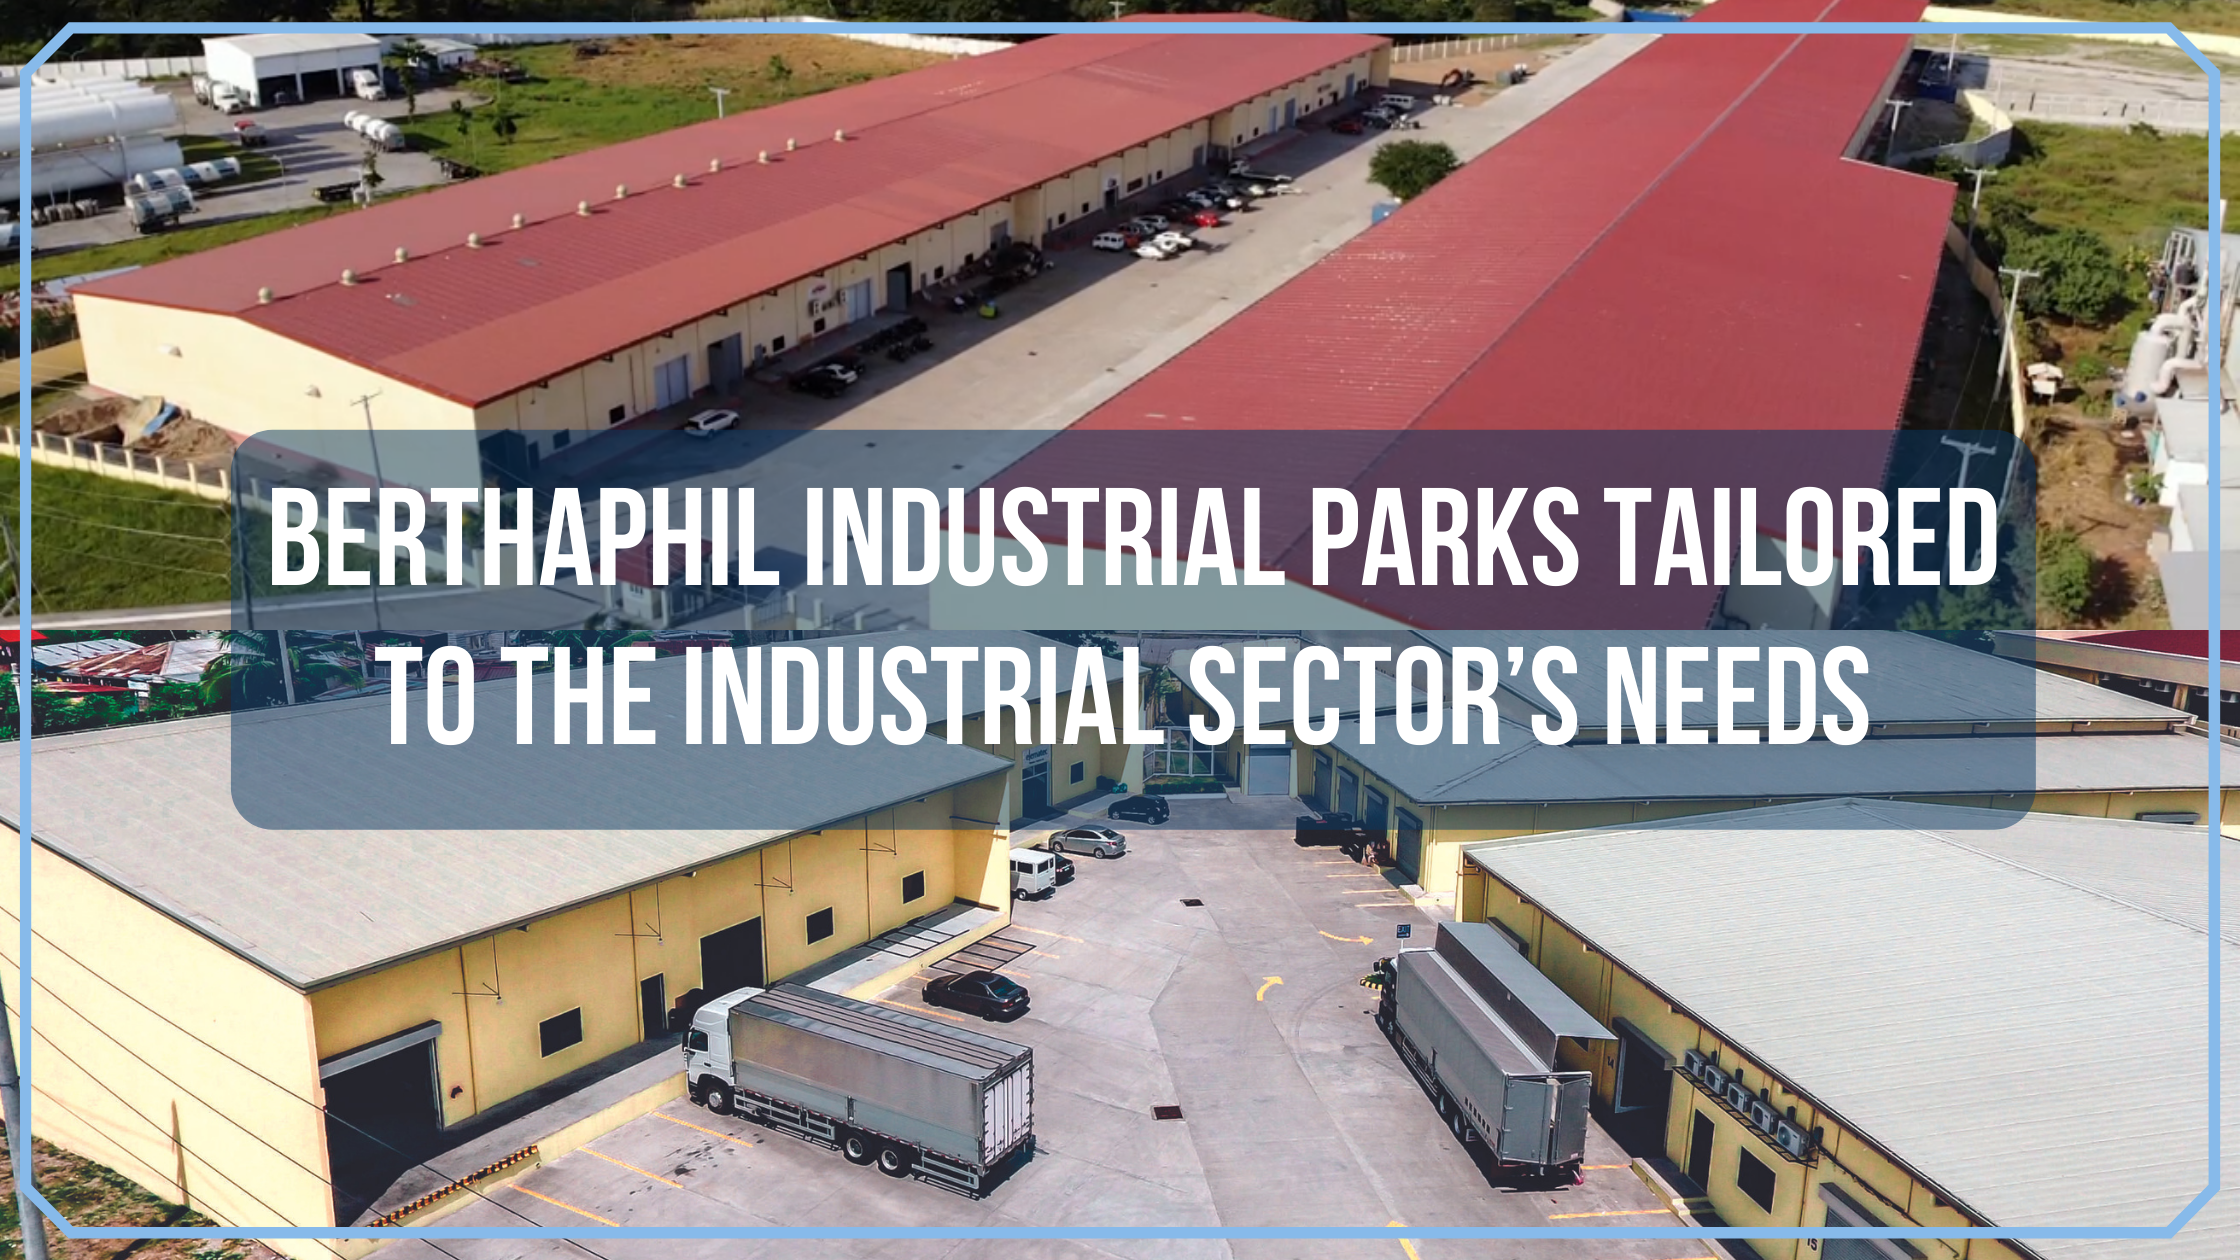 Berthaphil Industrial Parks Tailored to the Industrial Sector’s Needs 